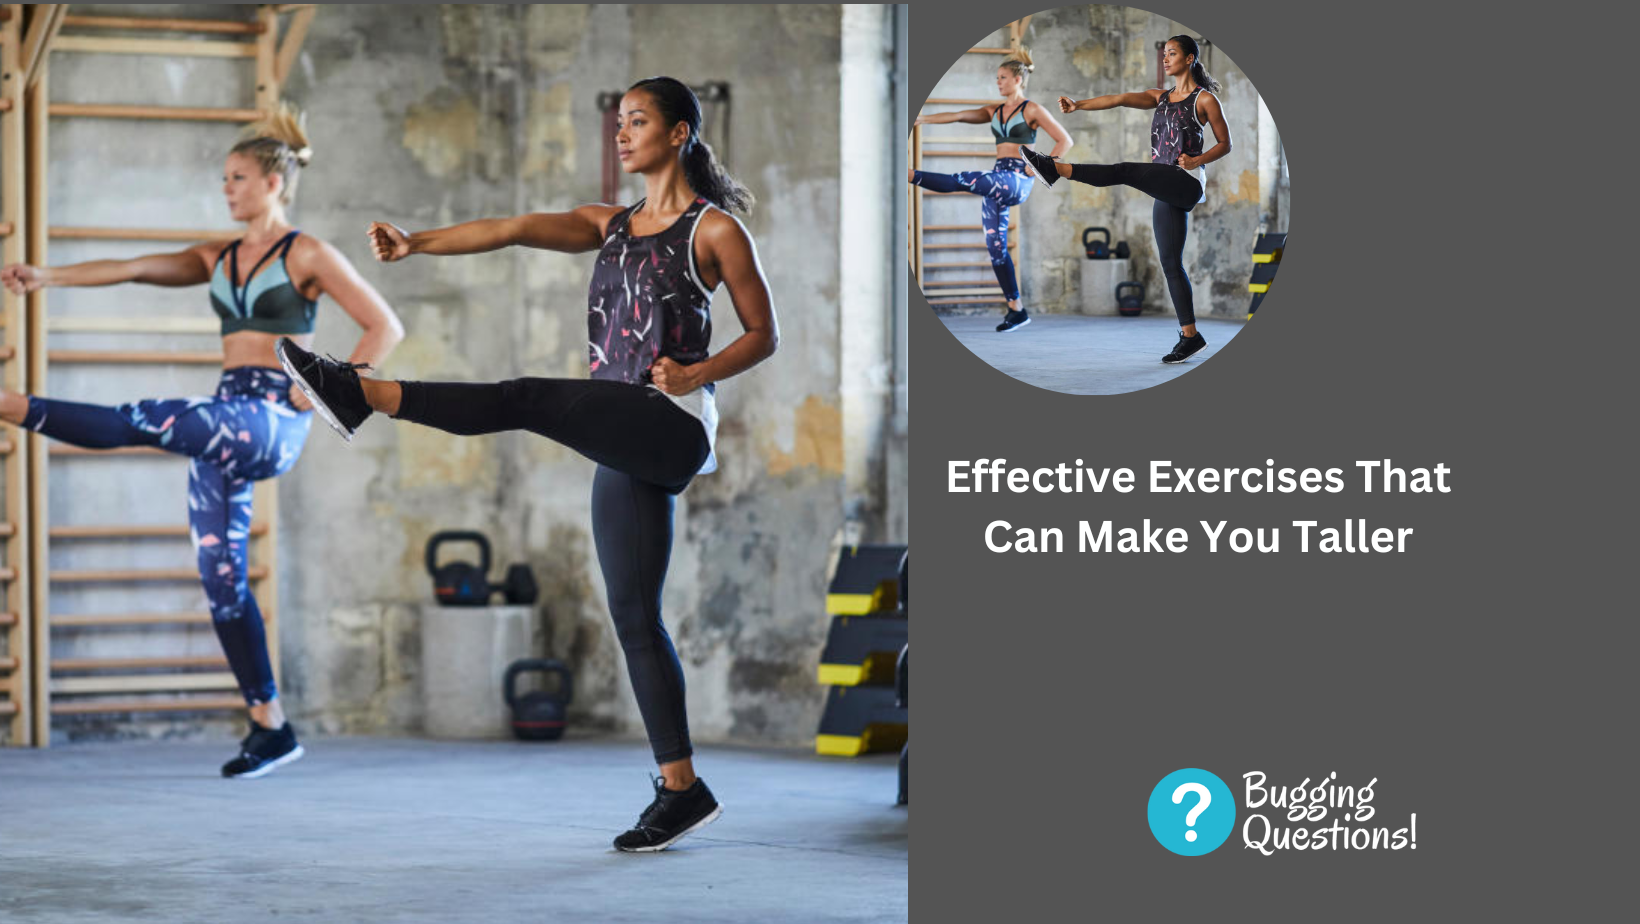 Effective Exercises That Can Make You Taller